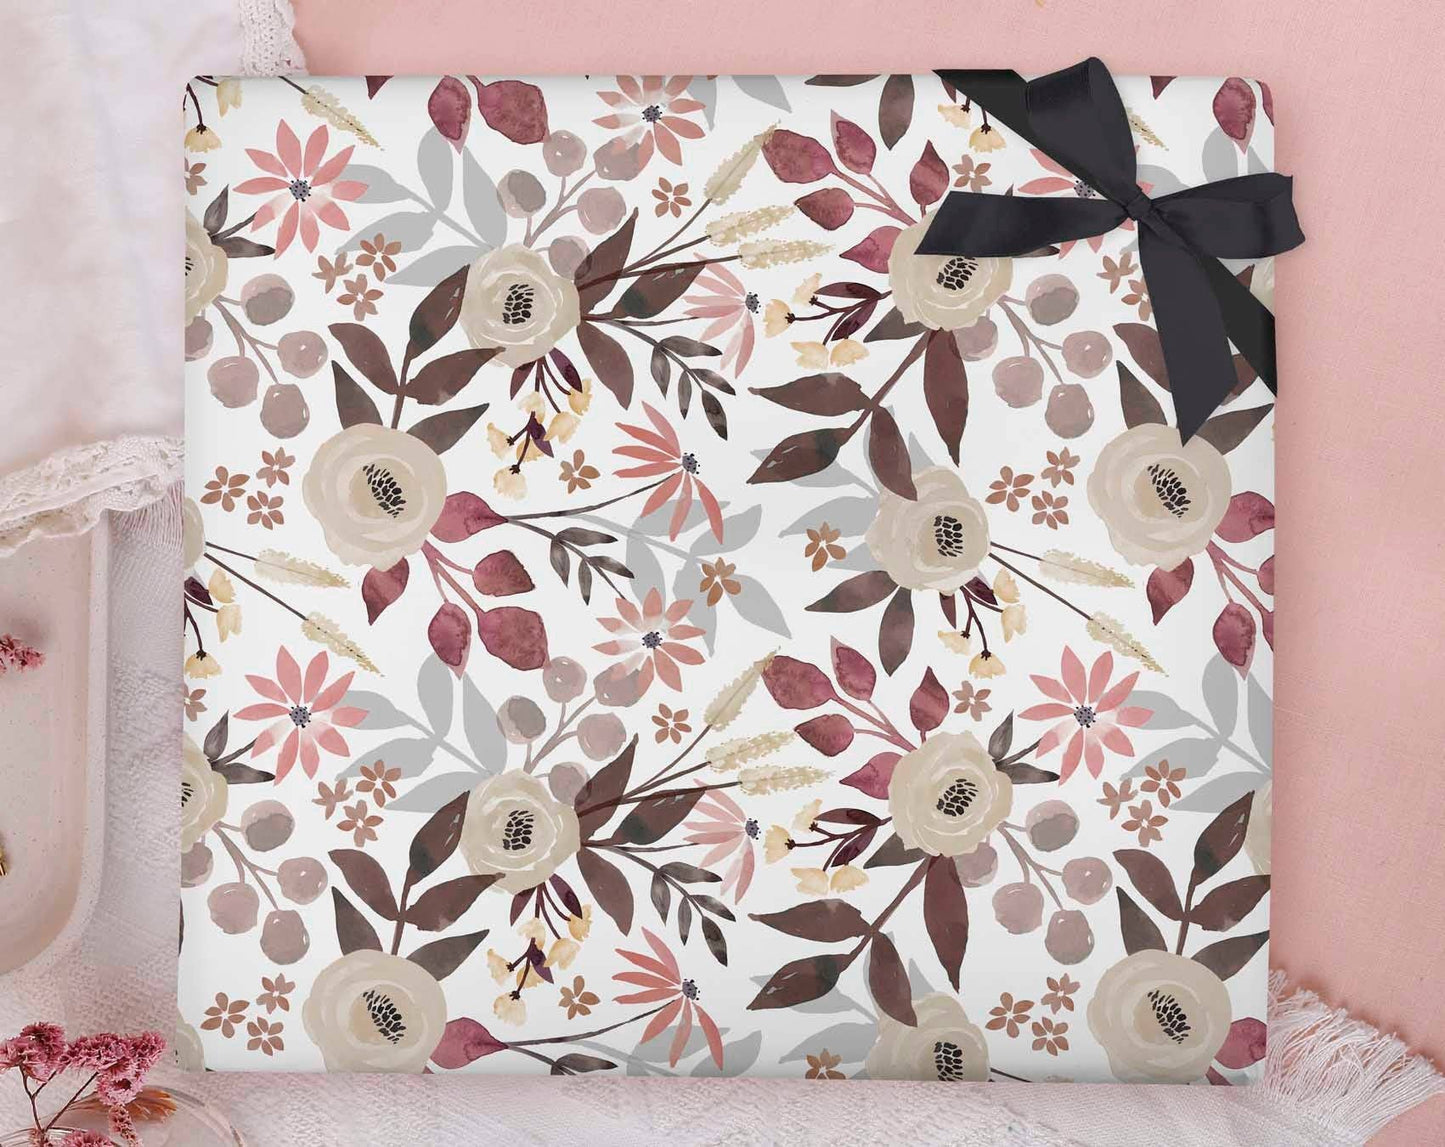 Gift Wrap - Autumn Florals Wrapping Paper Sheet